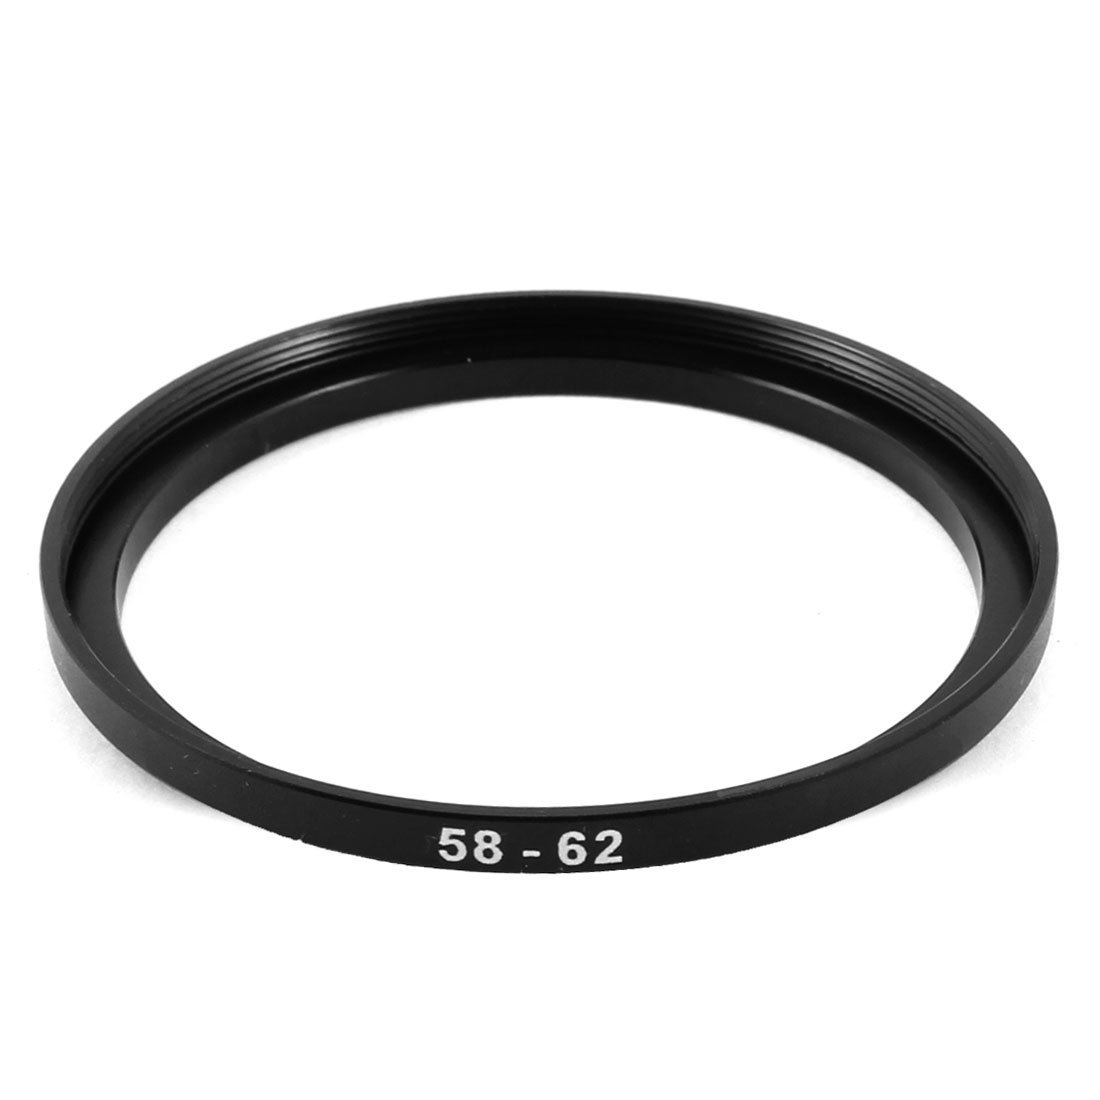 5x  58 -62  58   62   Up Ring    